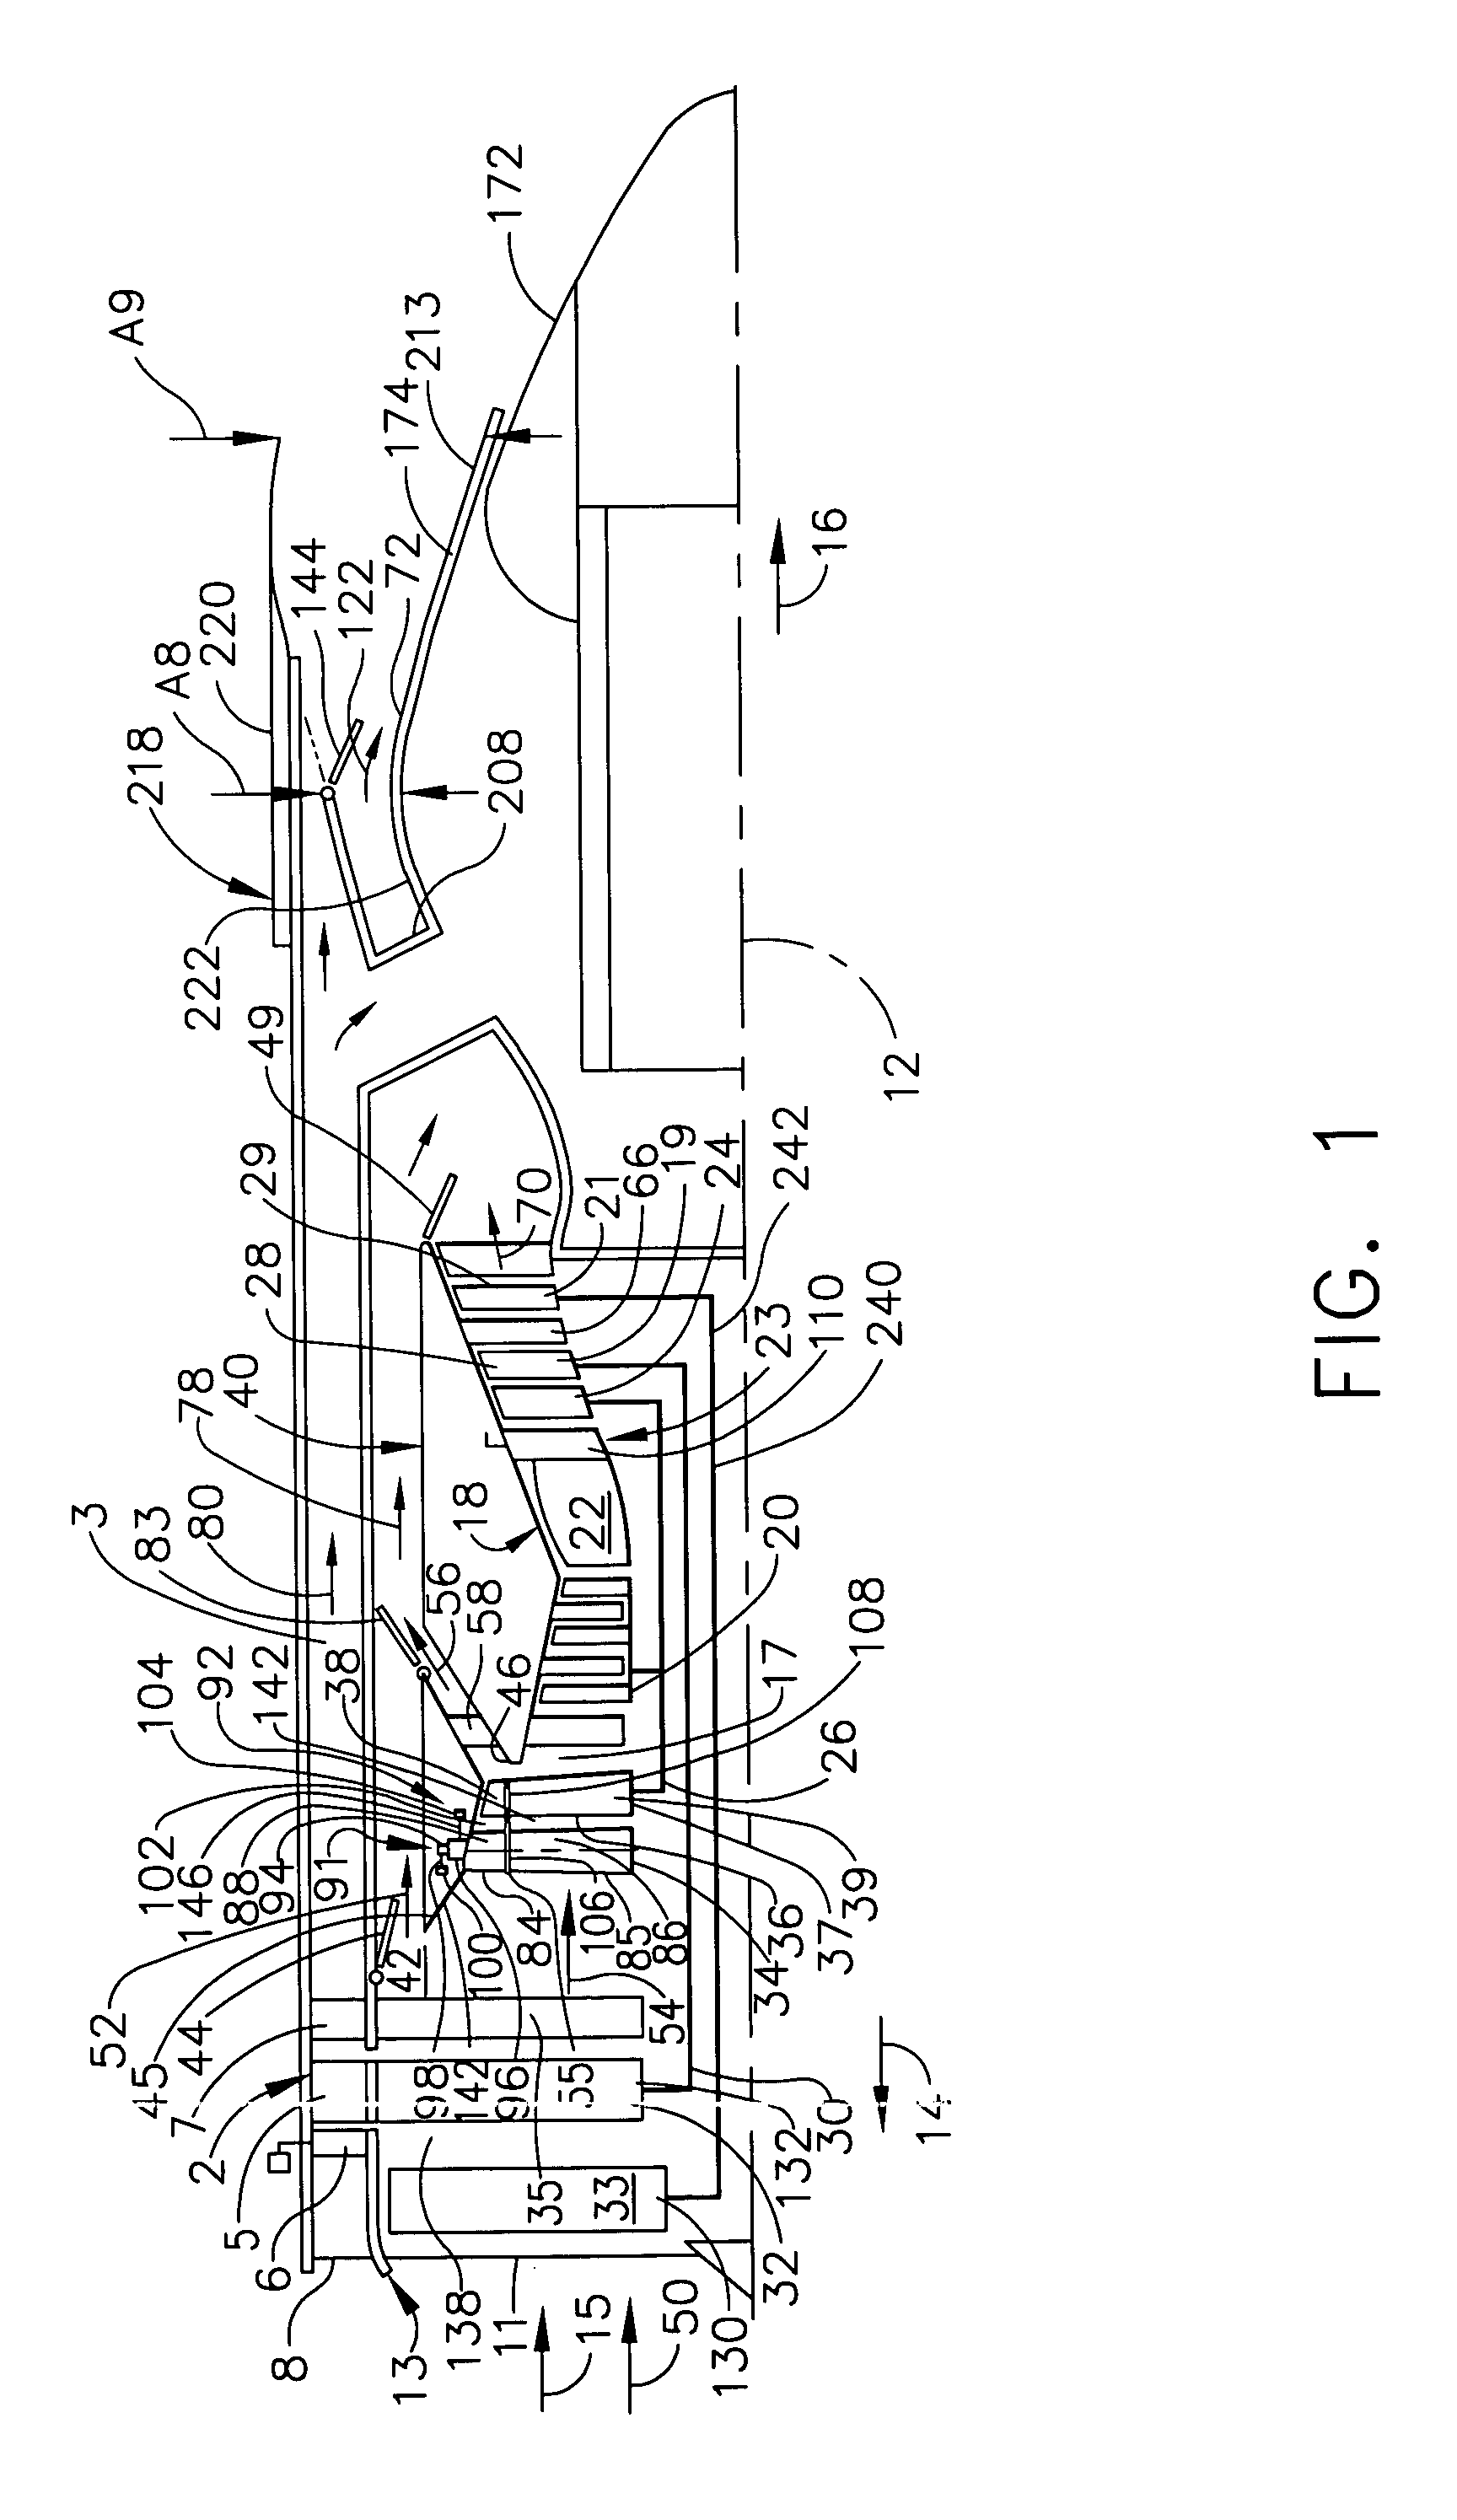 FLADE gas turbine engine with counter-rotatable fans